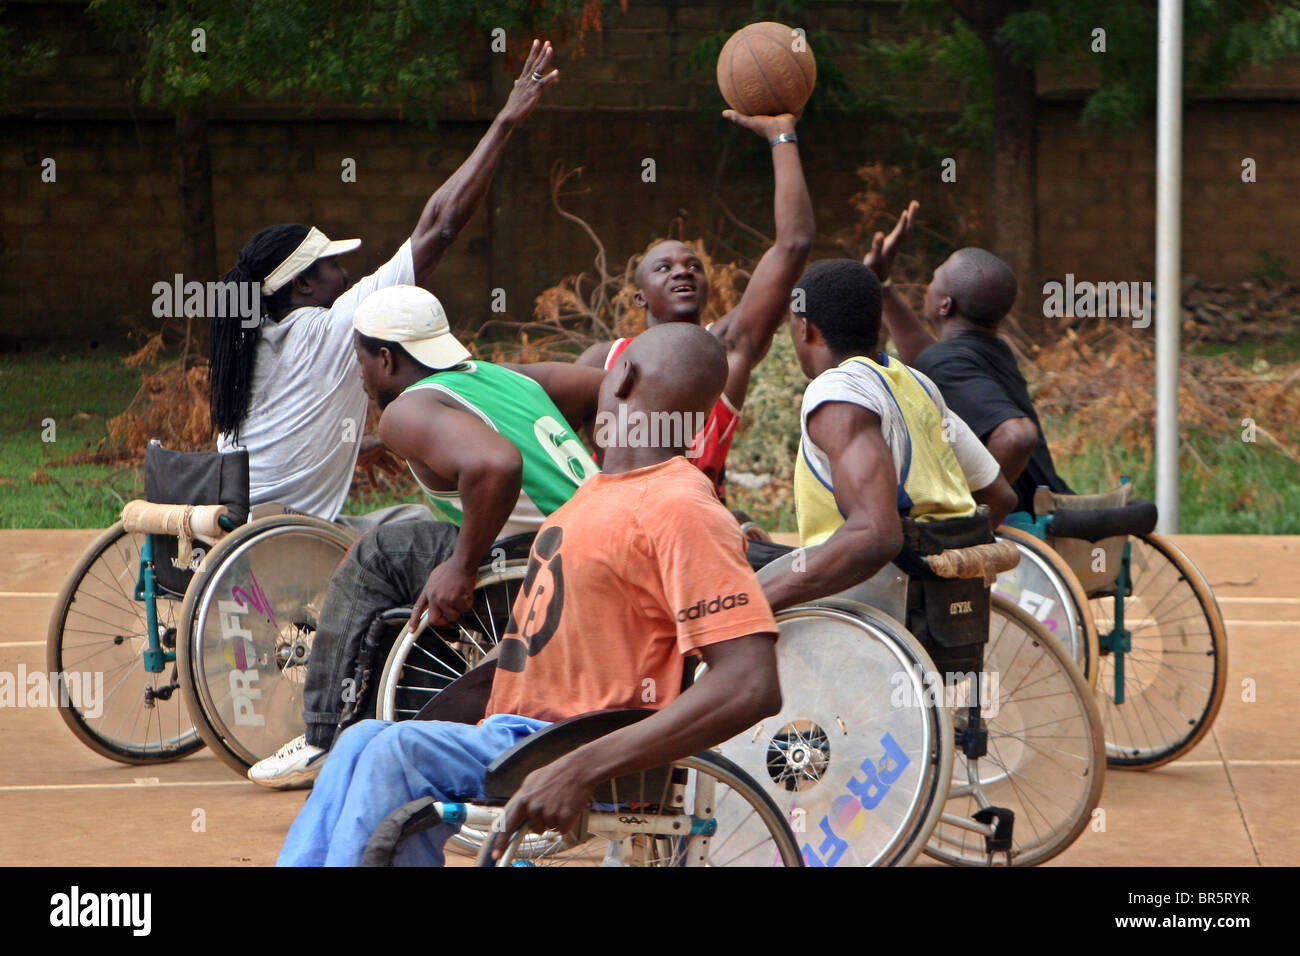 Competition is fierce during the wheelchair basketball training session in Burkina Faso. Stock Photo